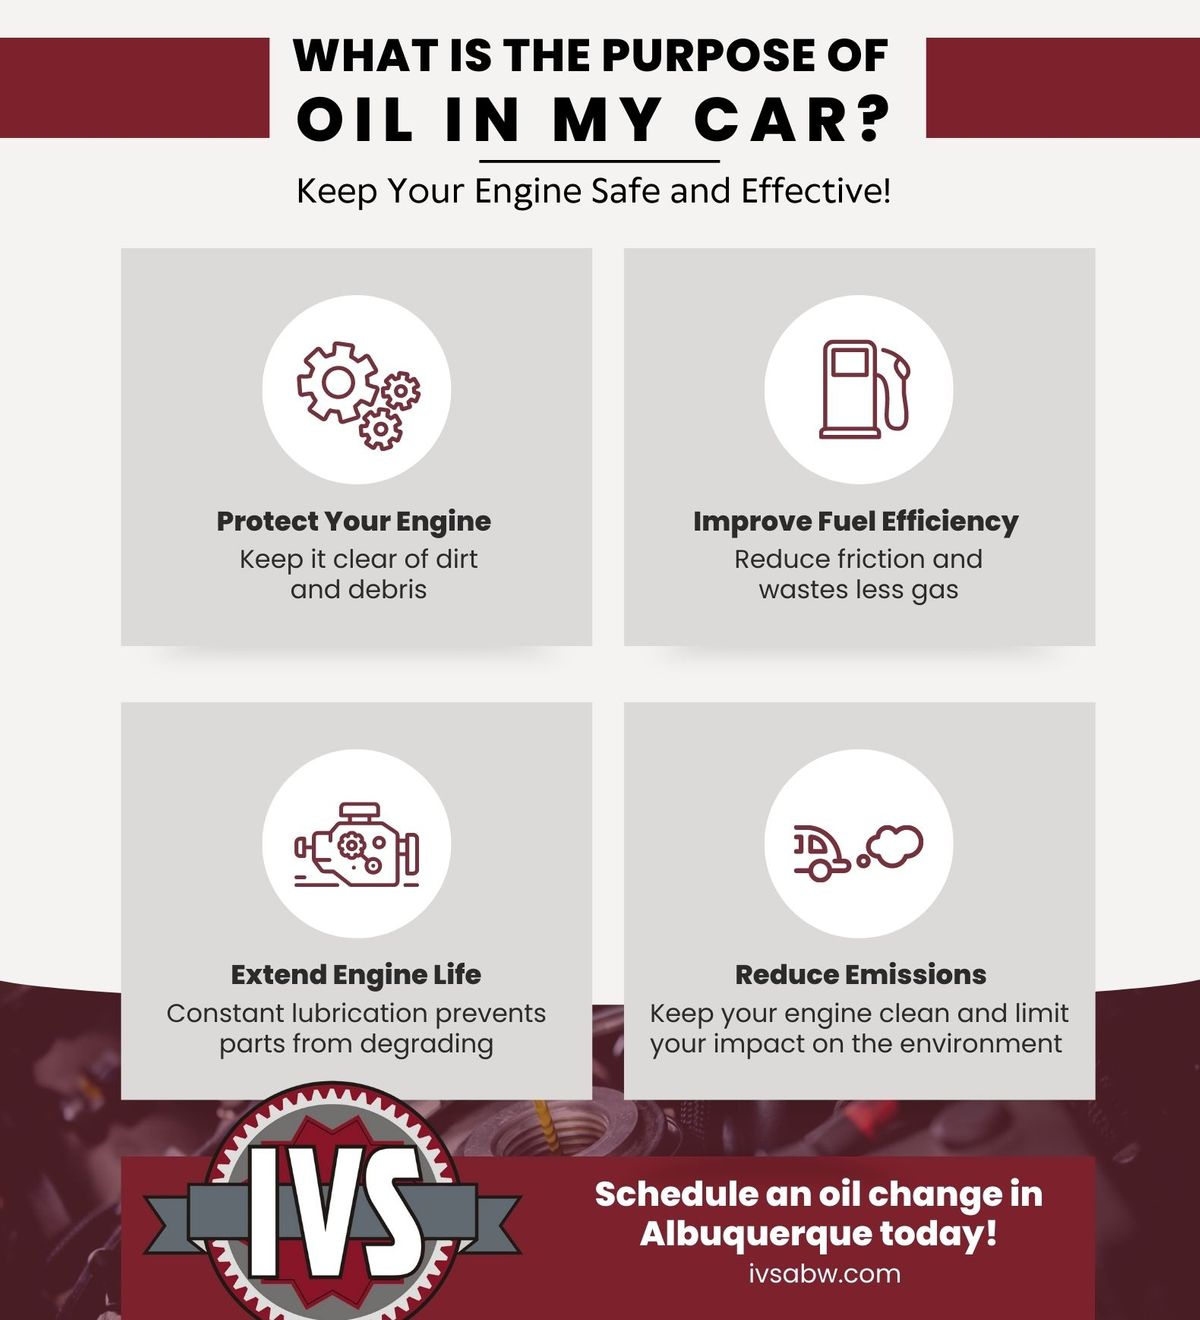 What's the Purpose of the Oil in My Car Infographic